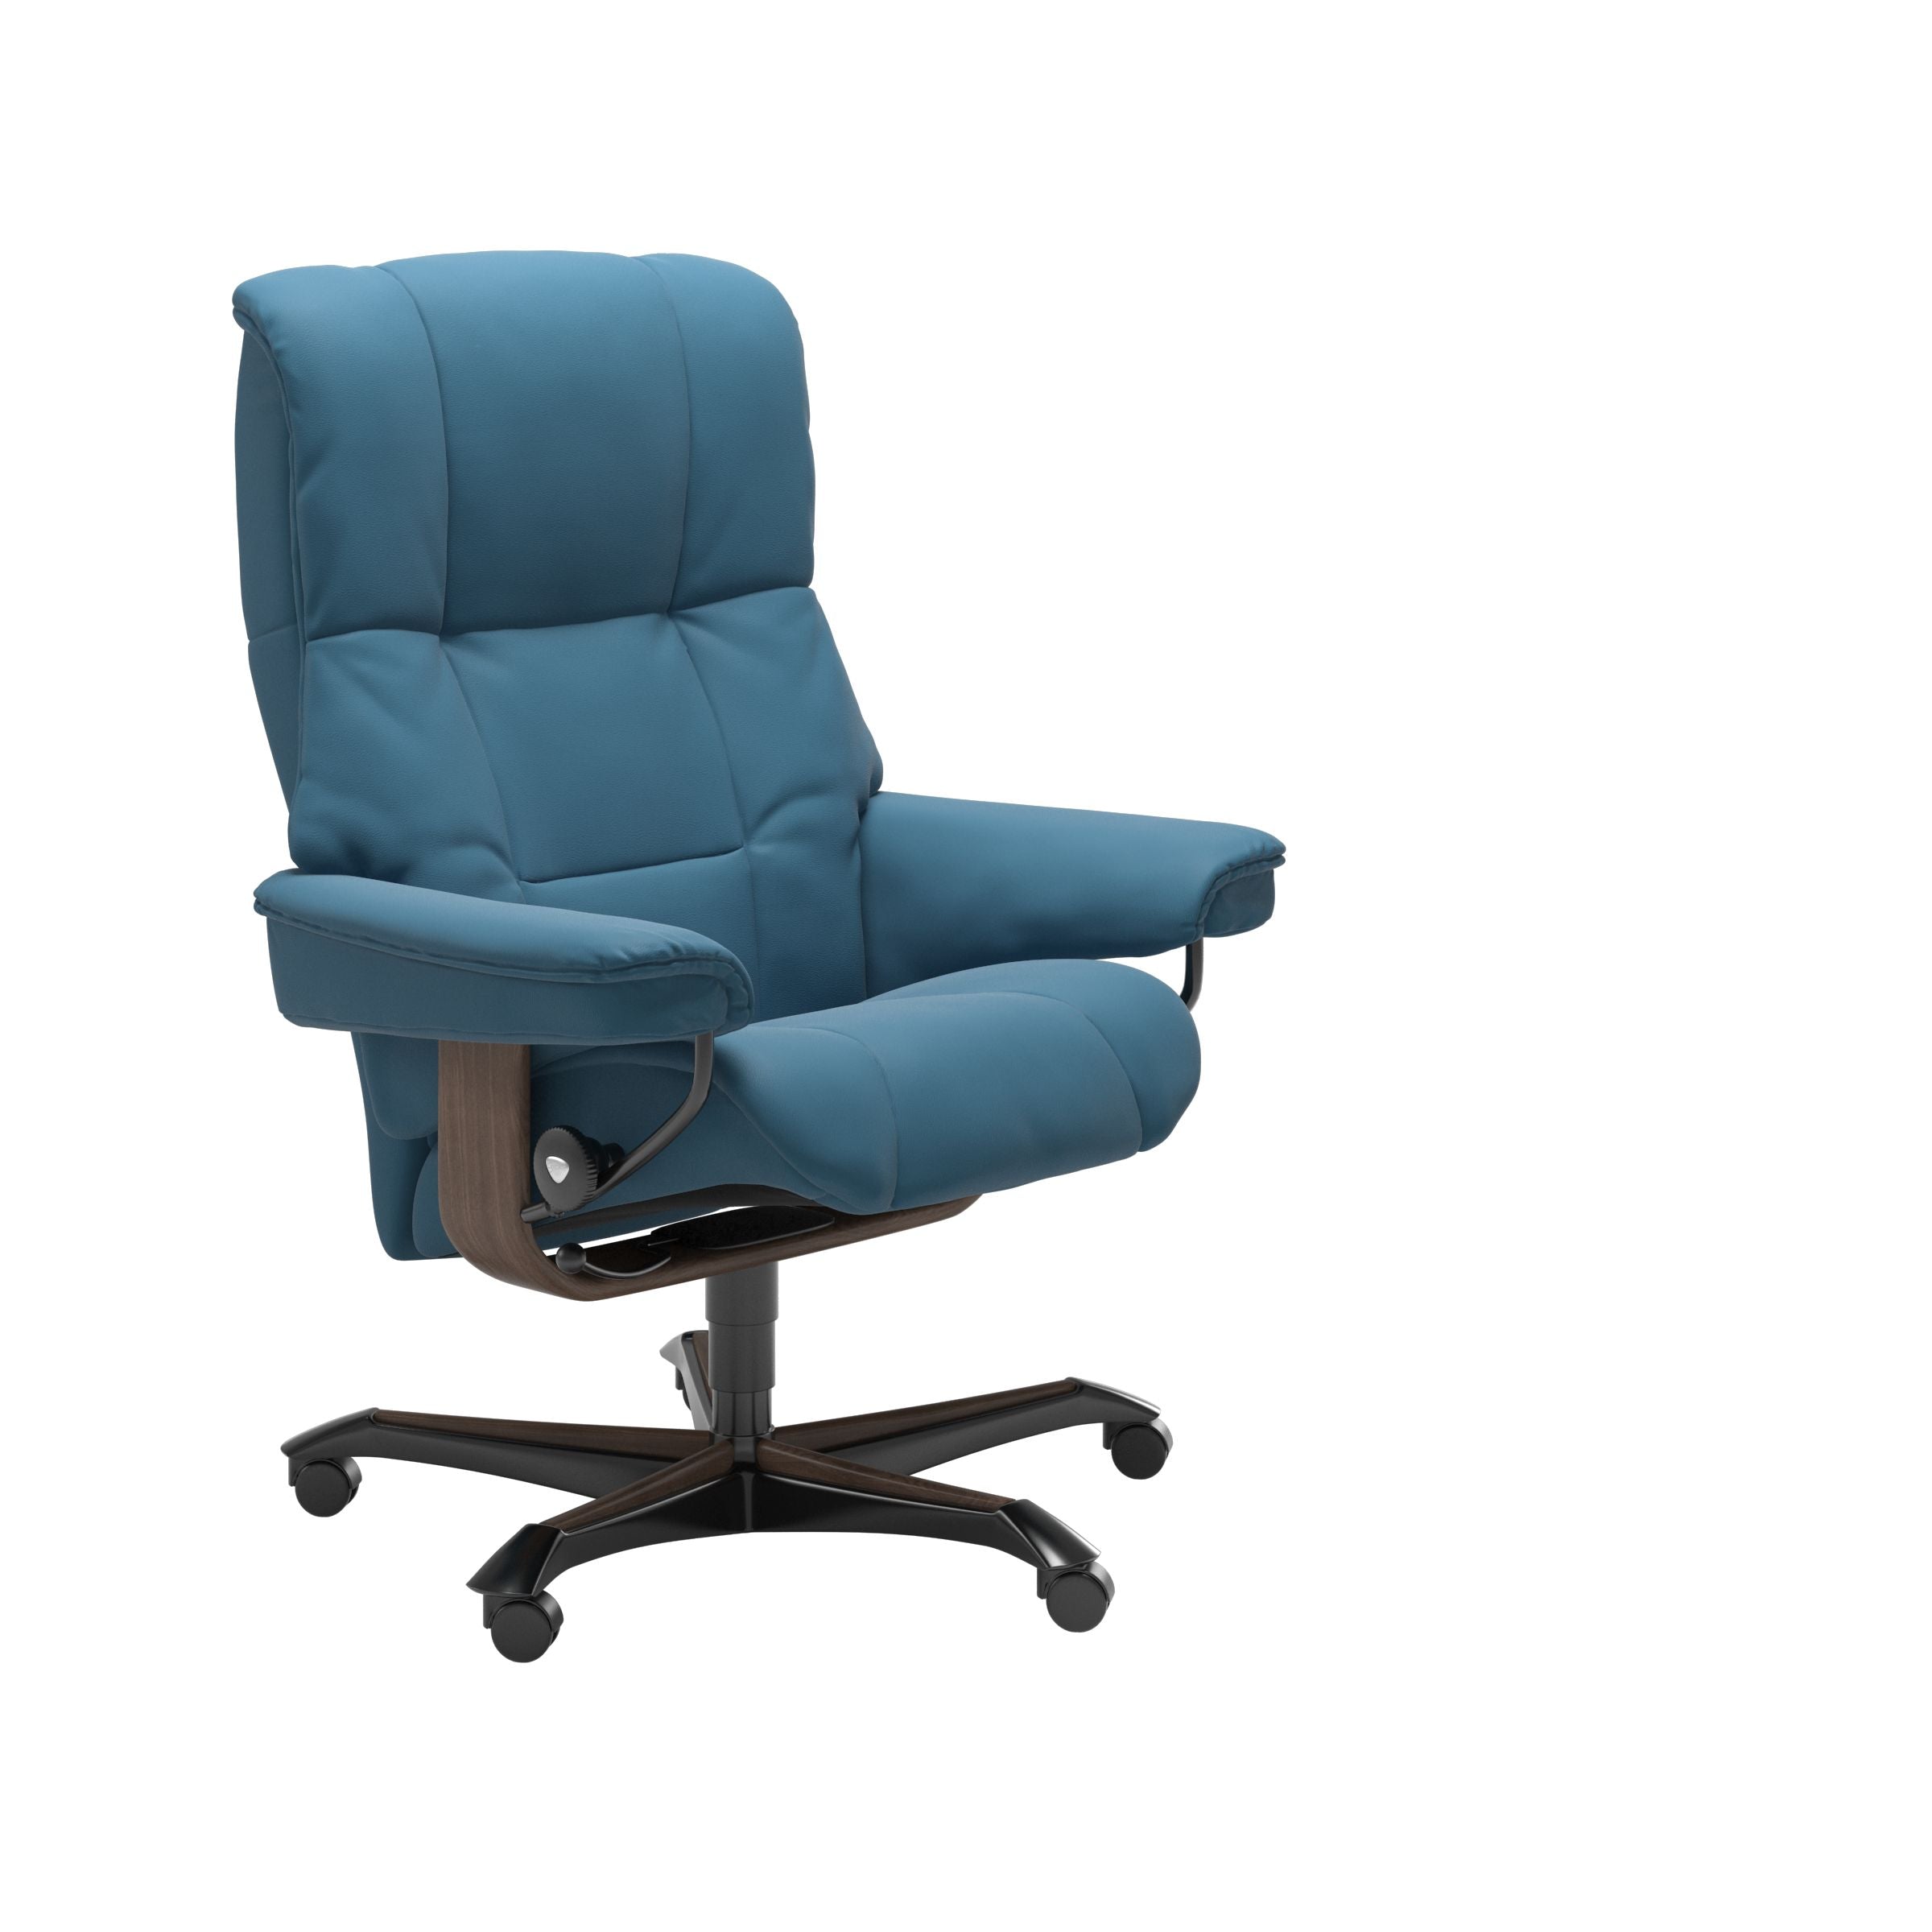 Stressless Mayfair Leather Office Chair